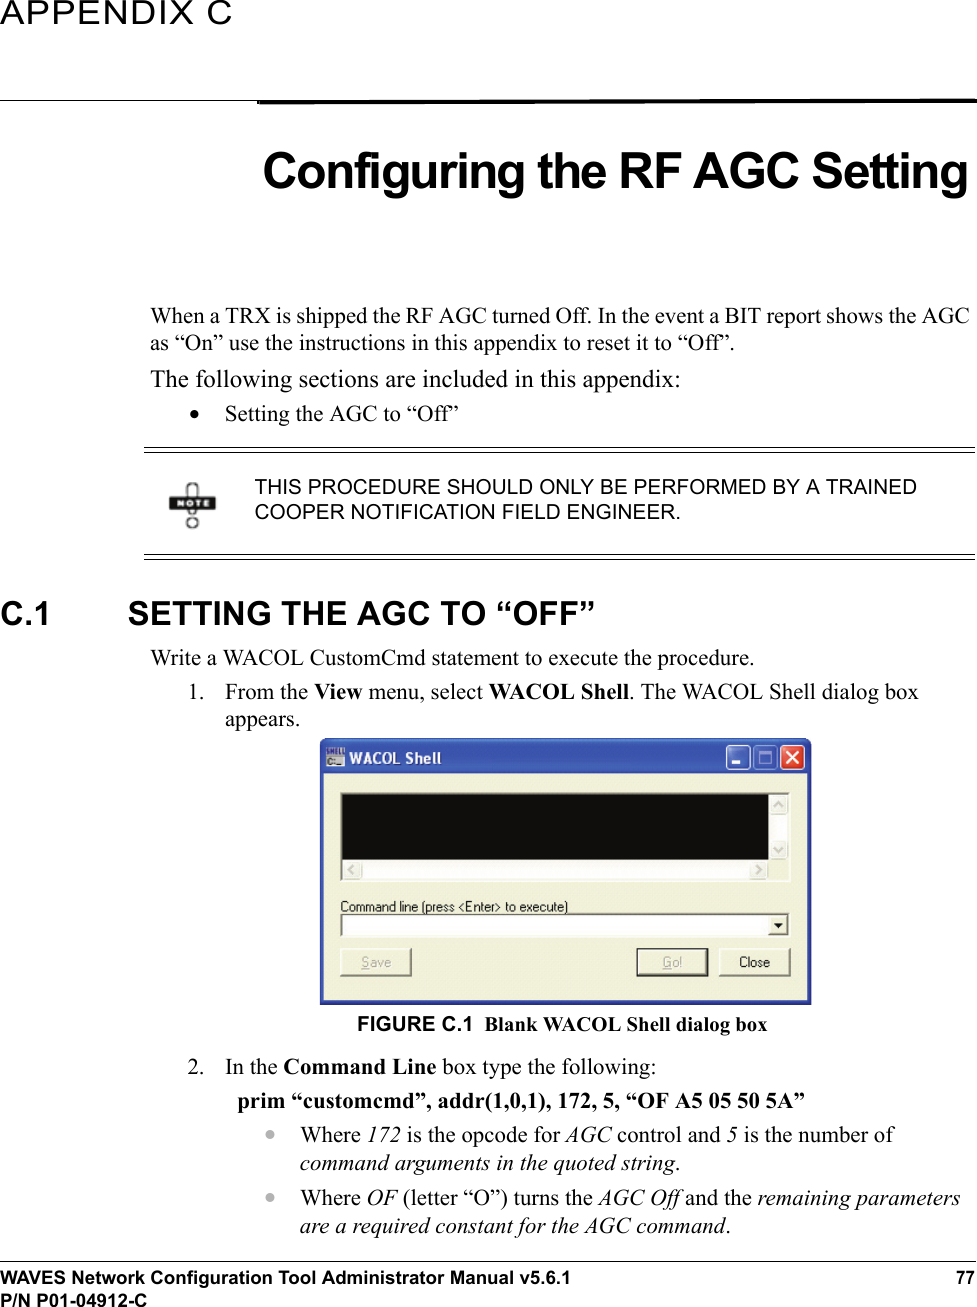 WAVES Network Configuration Tool Administrator Manual v5.6.177P/N P01-04912-CAPPENDIX CConfiguring the RF AGC SettingWhen a TRX is shipped the RF AGC turned Off. In the event a BIT report shows the AGC as “On” use the instructions in this appendix to reset it to “Off”. The following sections are included in this appendix:•Setting the AGC to “Off”C.1 SETTING THE AGC TO “OFF”Write a WACOL CustomCmd statement to execute the procedure.1. From the View menu, select WACOL Shell. The WACOL Shell dialog box appears.FIGURE C.1 Blank WACOL Shell dialog box2. In the Command Line box type the following: prim “customcmd”, addr(1,0,1), 172, 5, “OF A5 05 50 5A”•Where 172 is the opcode for AGC control and 5 is the number of command arguments in the quoted string.•Where OF (letter “O”) turns the AGC Off and the remaining parameters are a required constant for the AGC command.THIS PROCEDURE SHOULD ONLY BE PERFORMED BY A TRAINED COOPER NOTIFICATION FIELD ENGINEER.